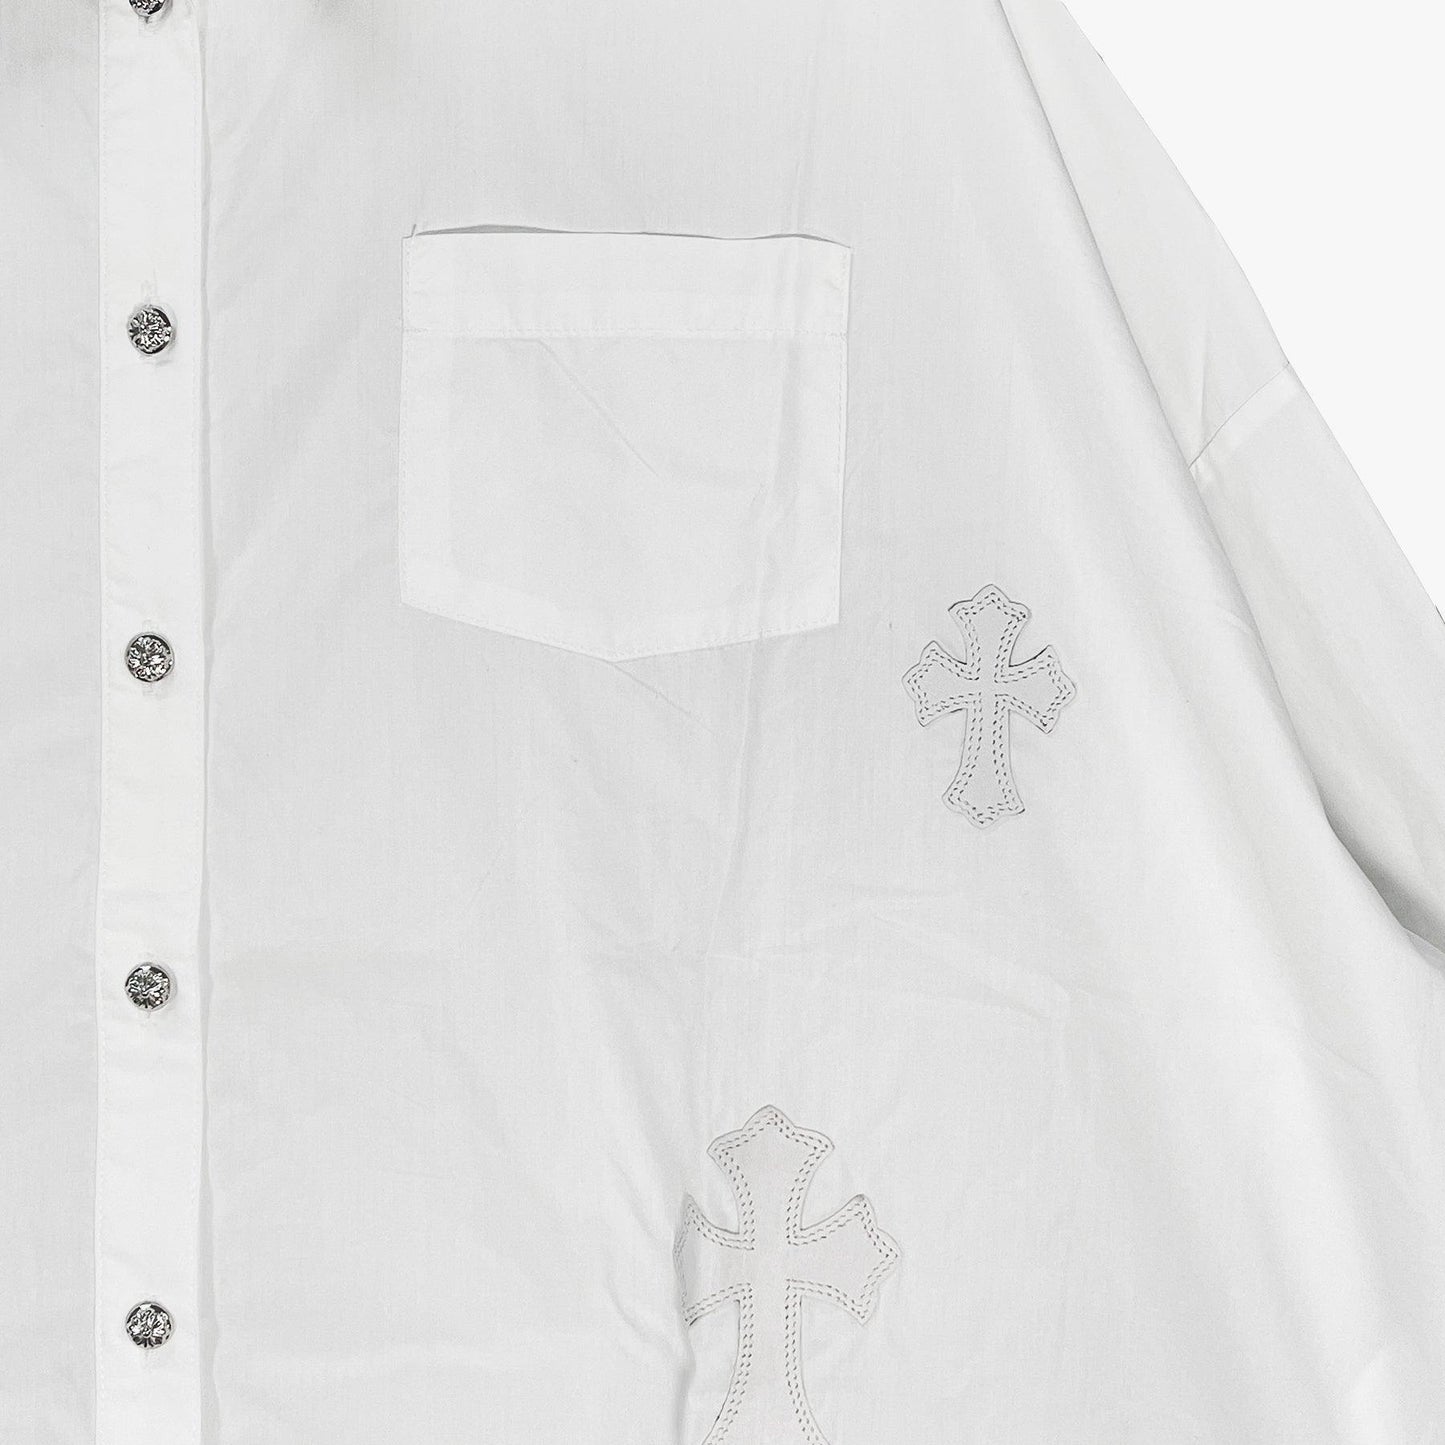 Chrome Hearts White Patent Leather Cross Relax fit Shirt - SHENGLI ROAD MARKET